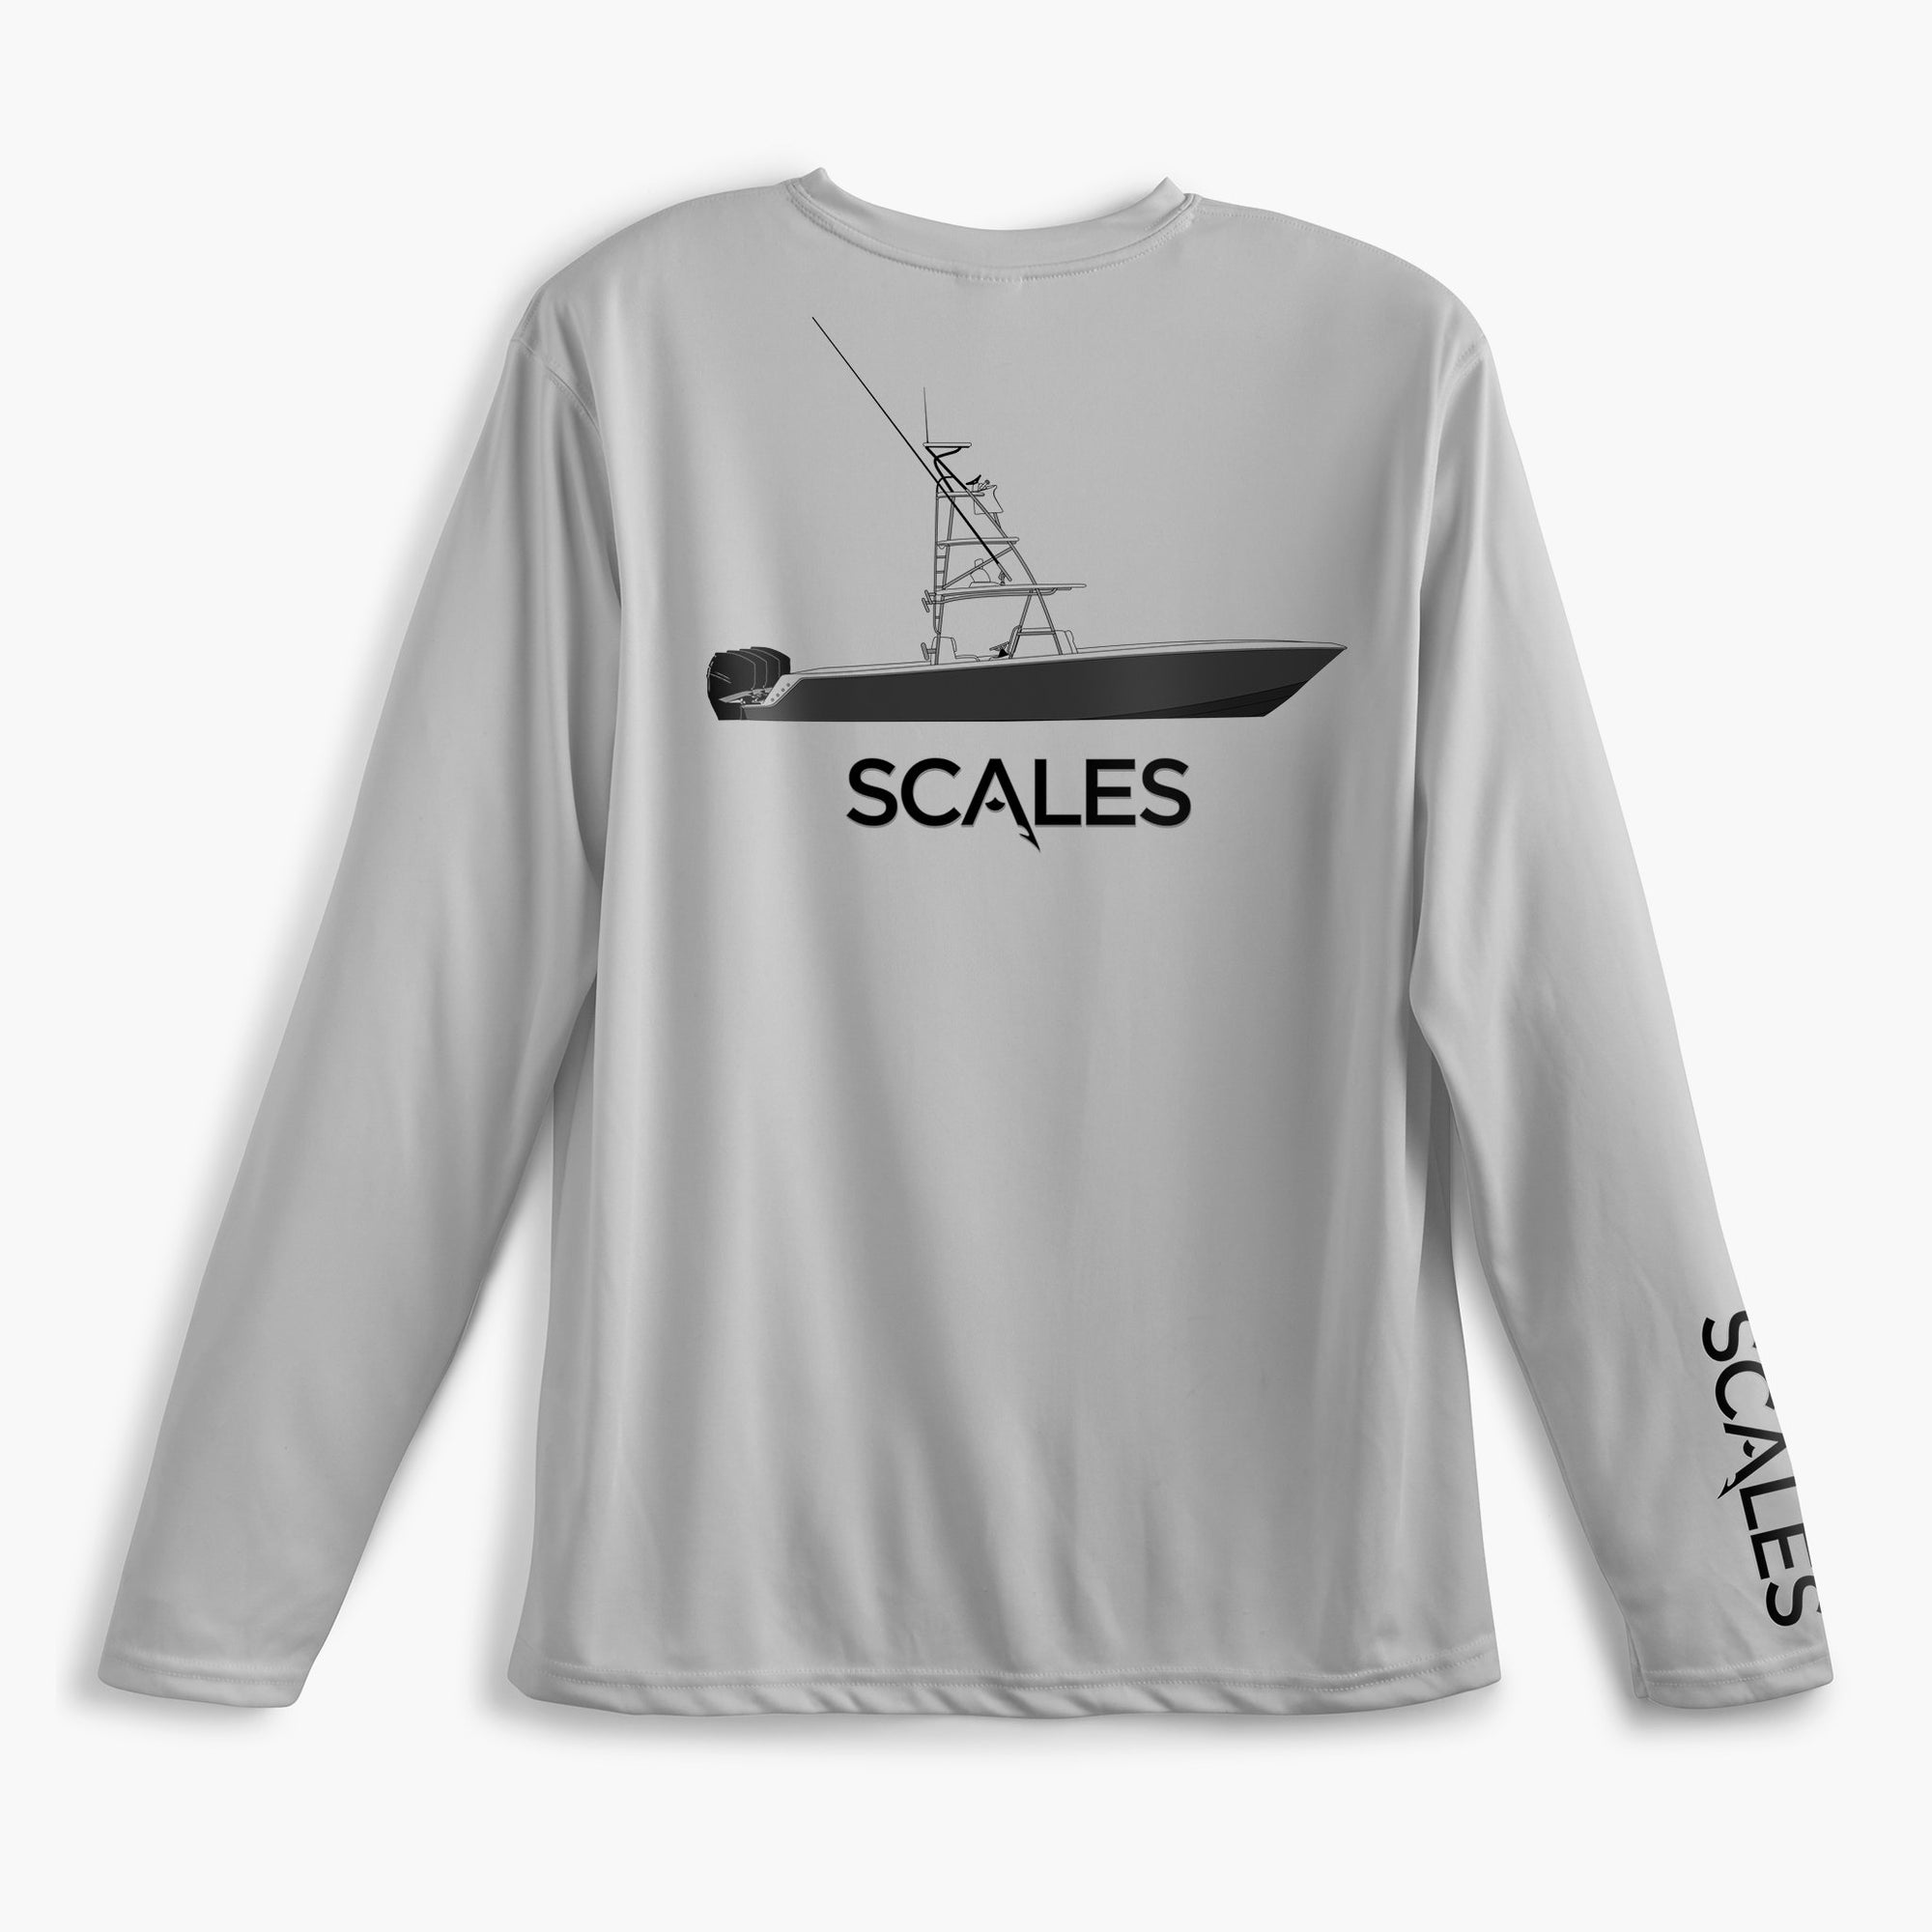 Scales Gear Pro Performance Team Scales Crew Grey Shirt - Rear View